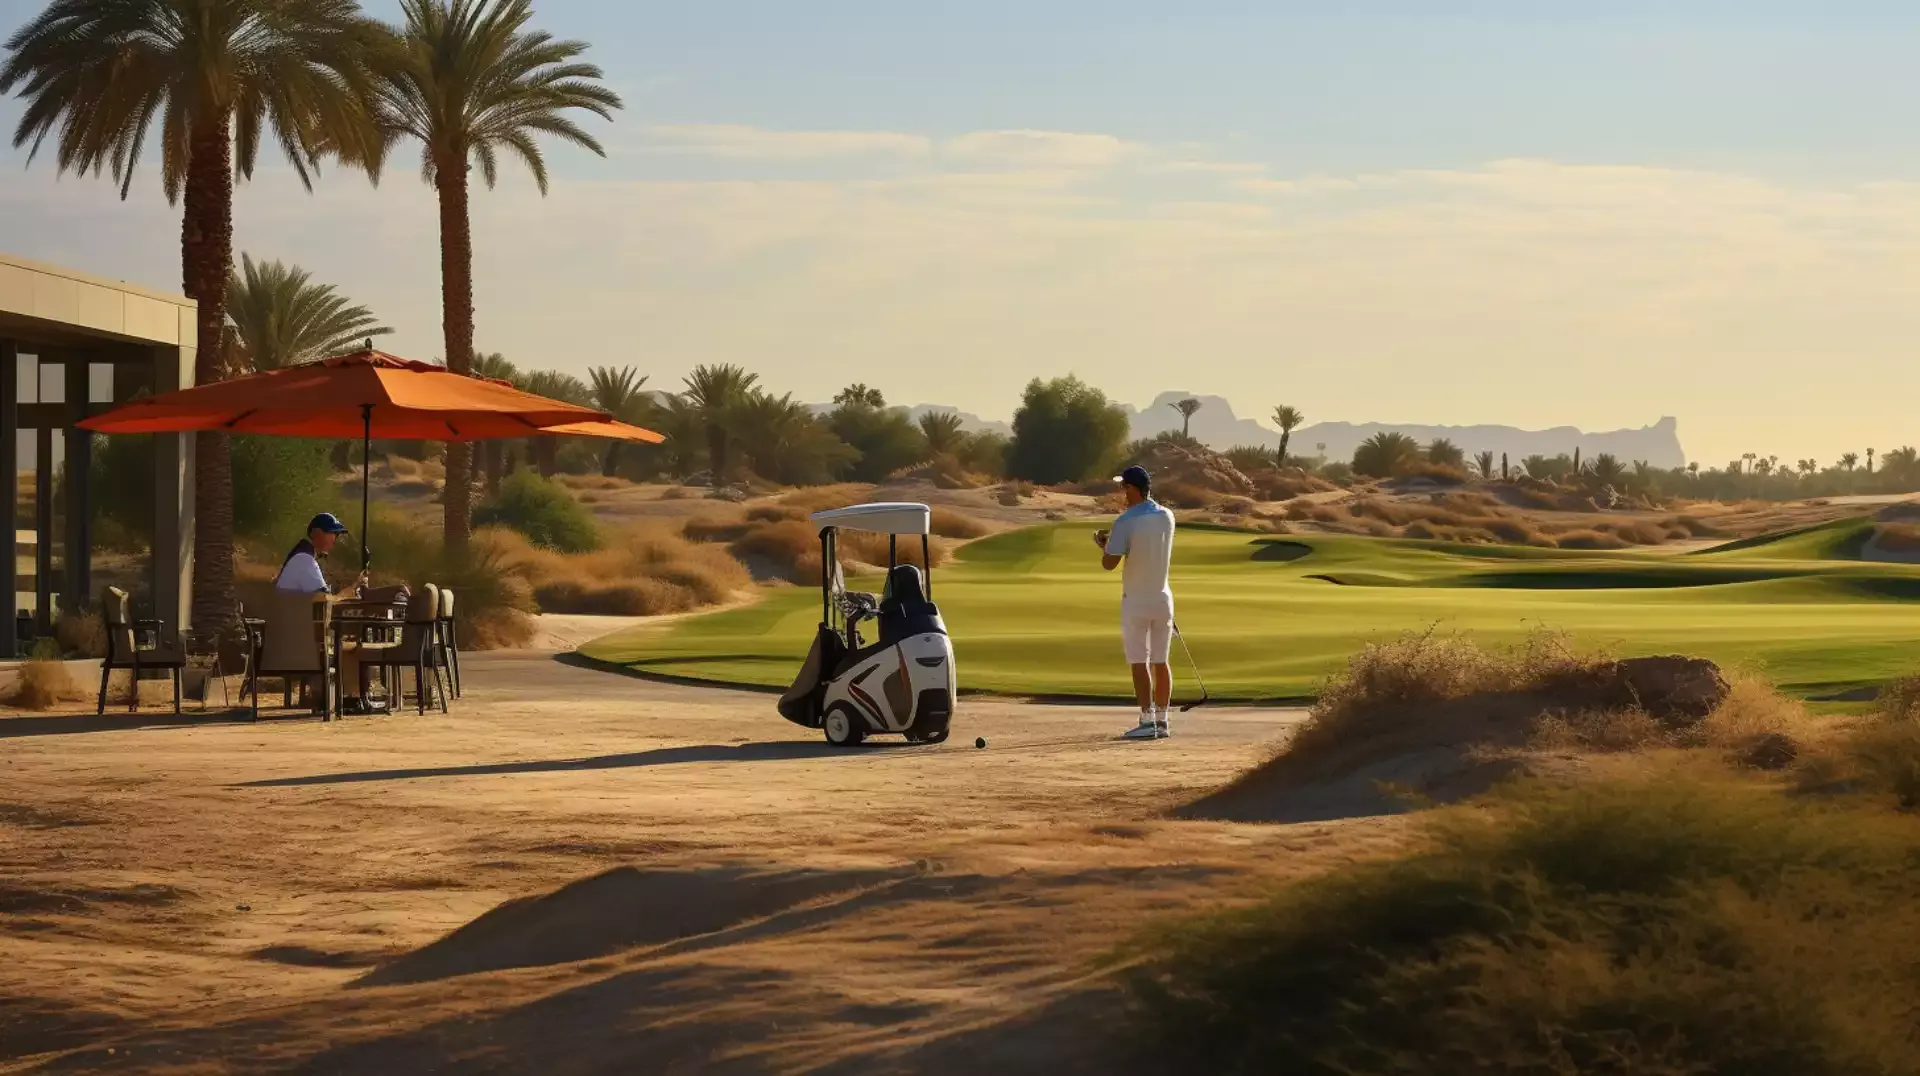 Golfers enjoying a round at the 18 hole, par 72 signature course at Arabian Ranches Golf Club, surrounded by picturesque fairways and indigenous land 